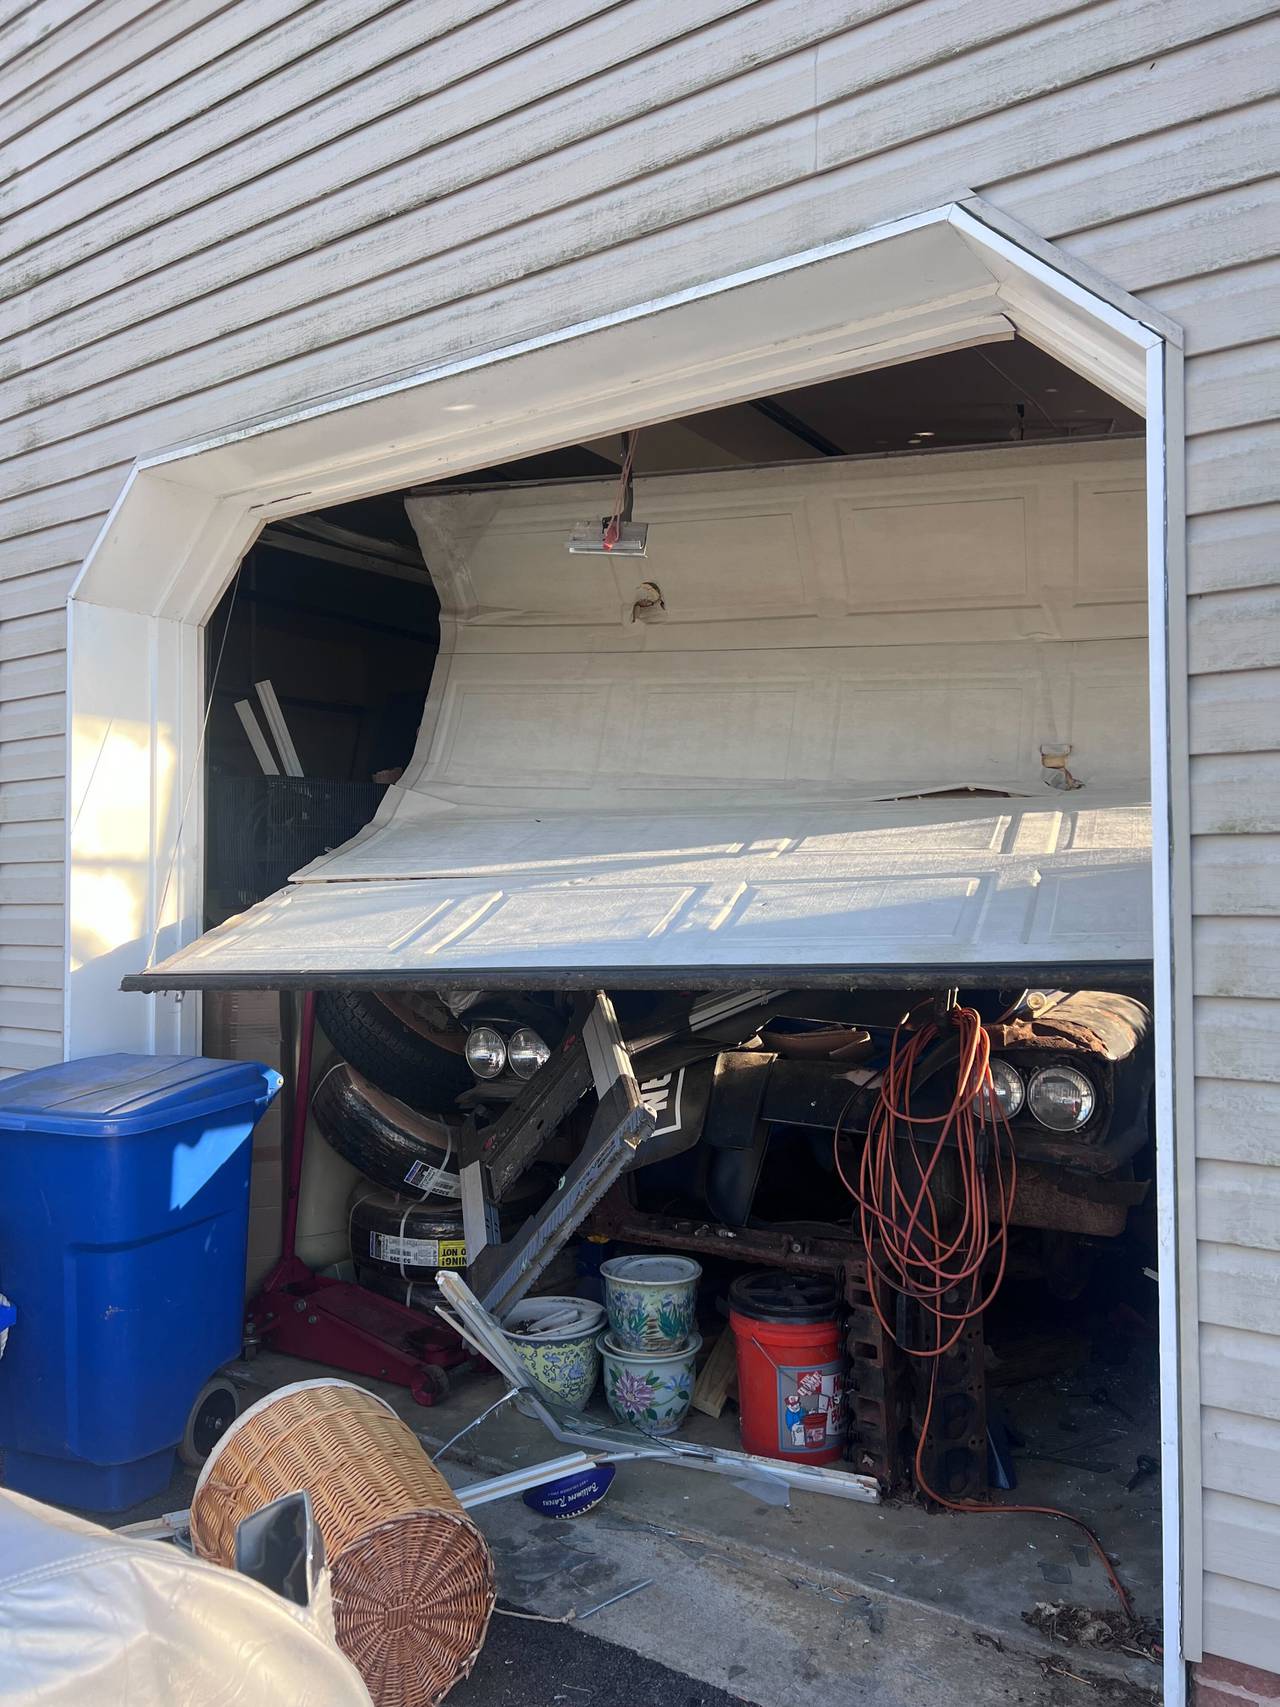 The bent garage door at the Cockeysville home of David Linthicum on Friday, Feb. 10.